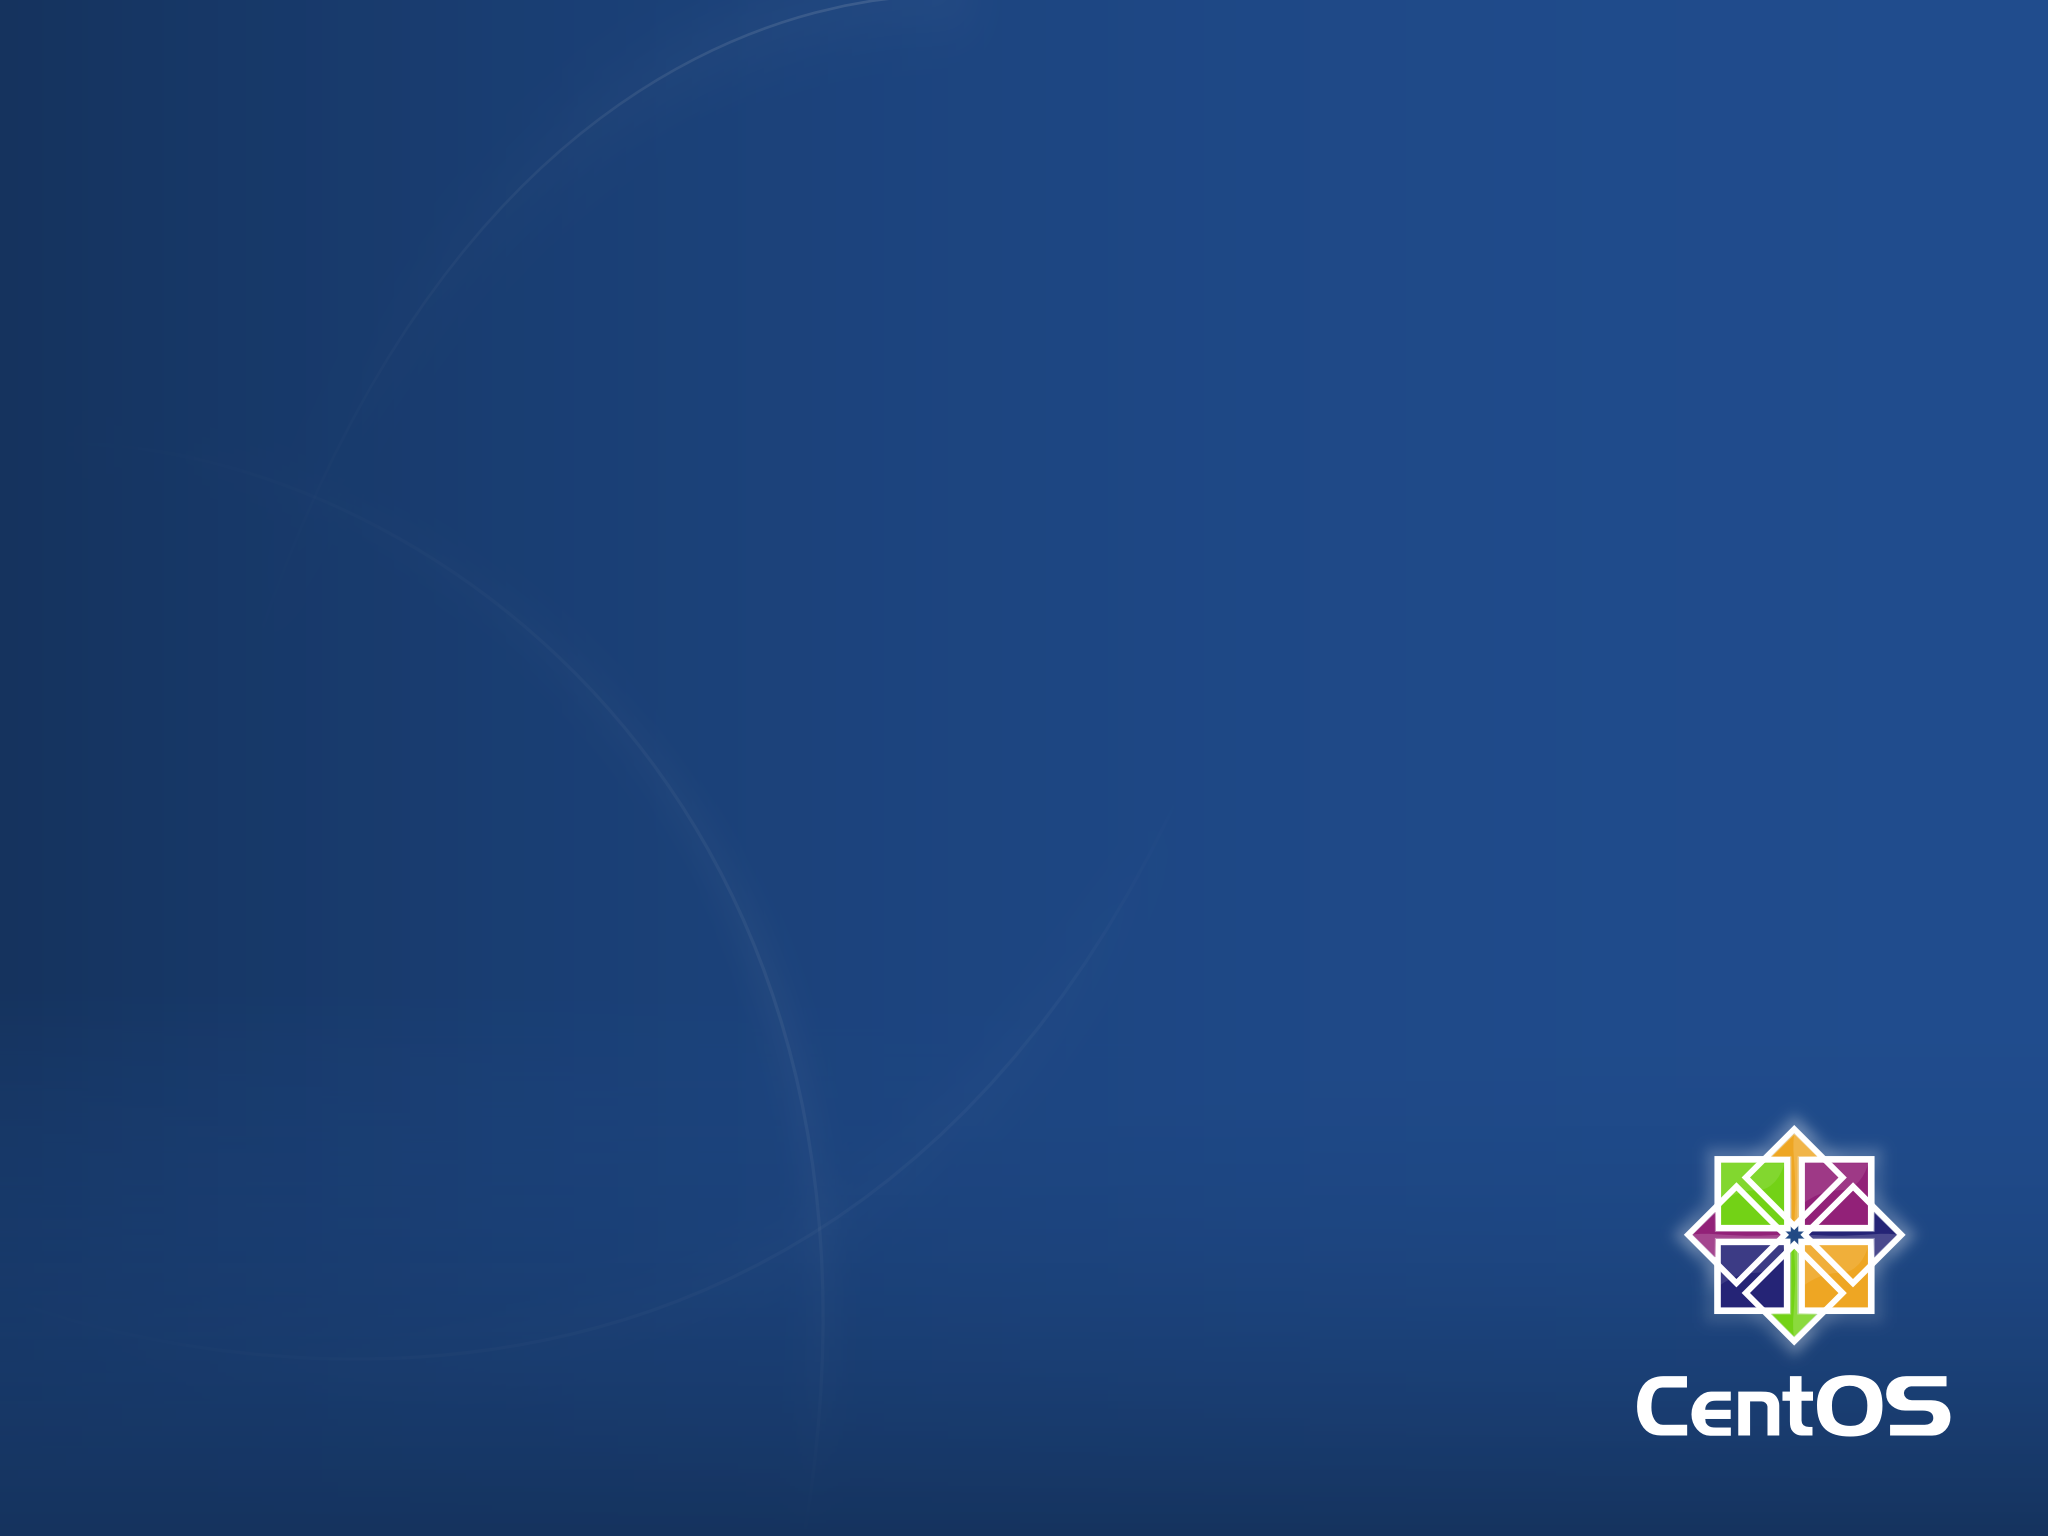 CentOS Wallpaper | Linux with examples